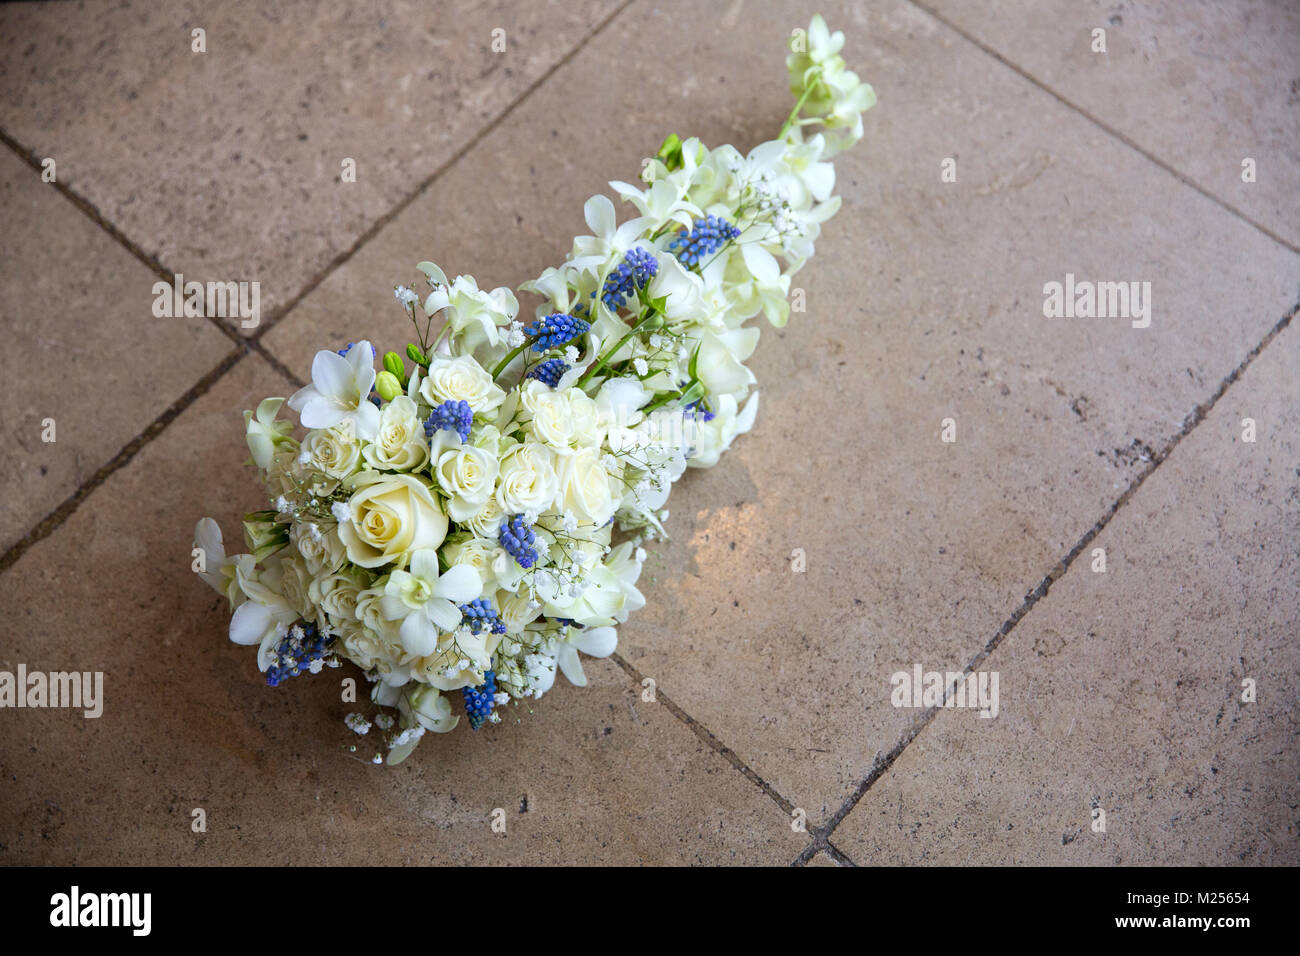 White bridal wedding bouquet on floor tiles, elevated view Stock Photo